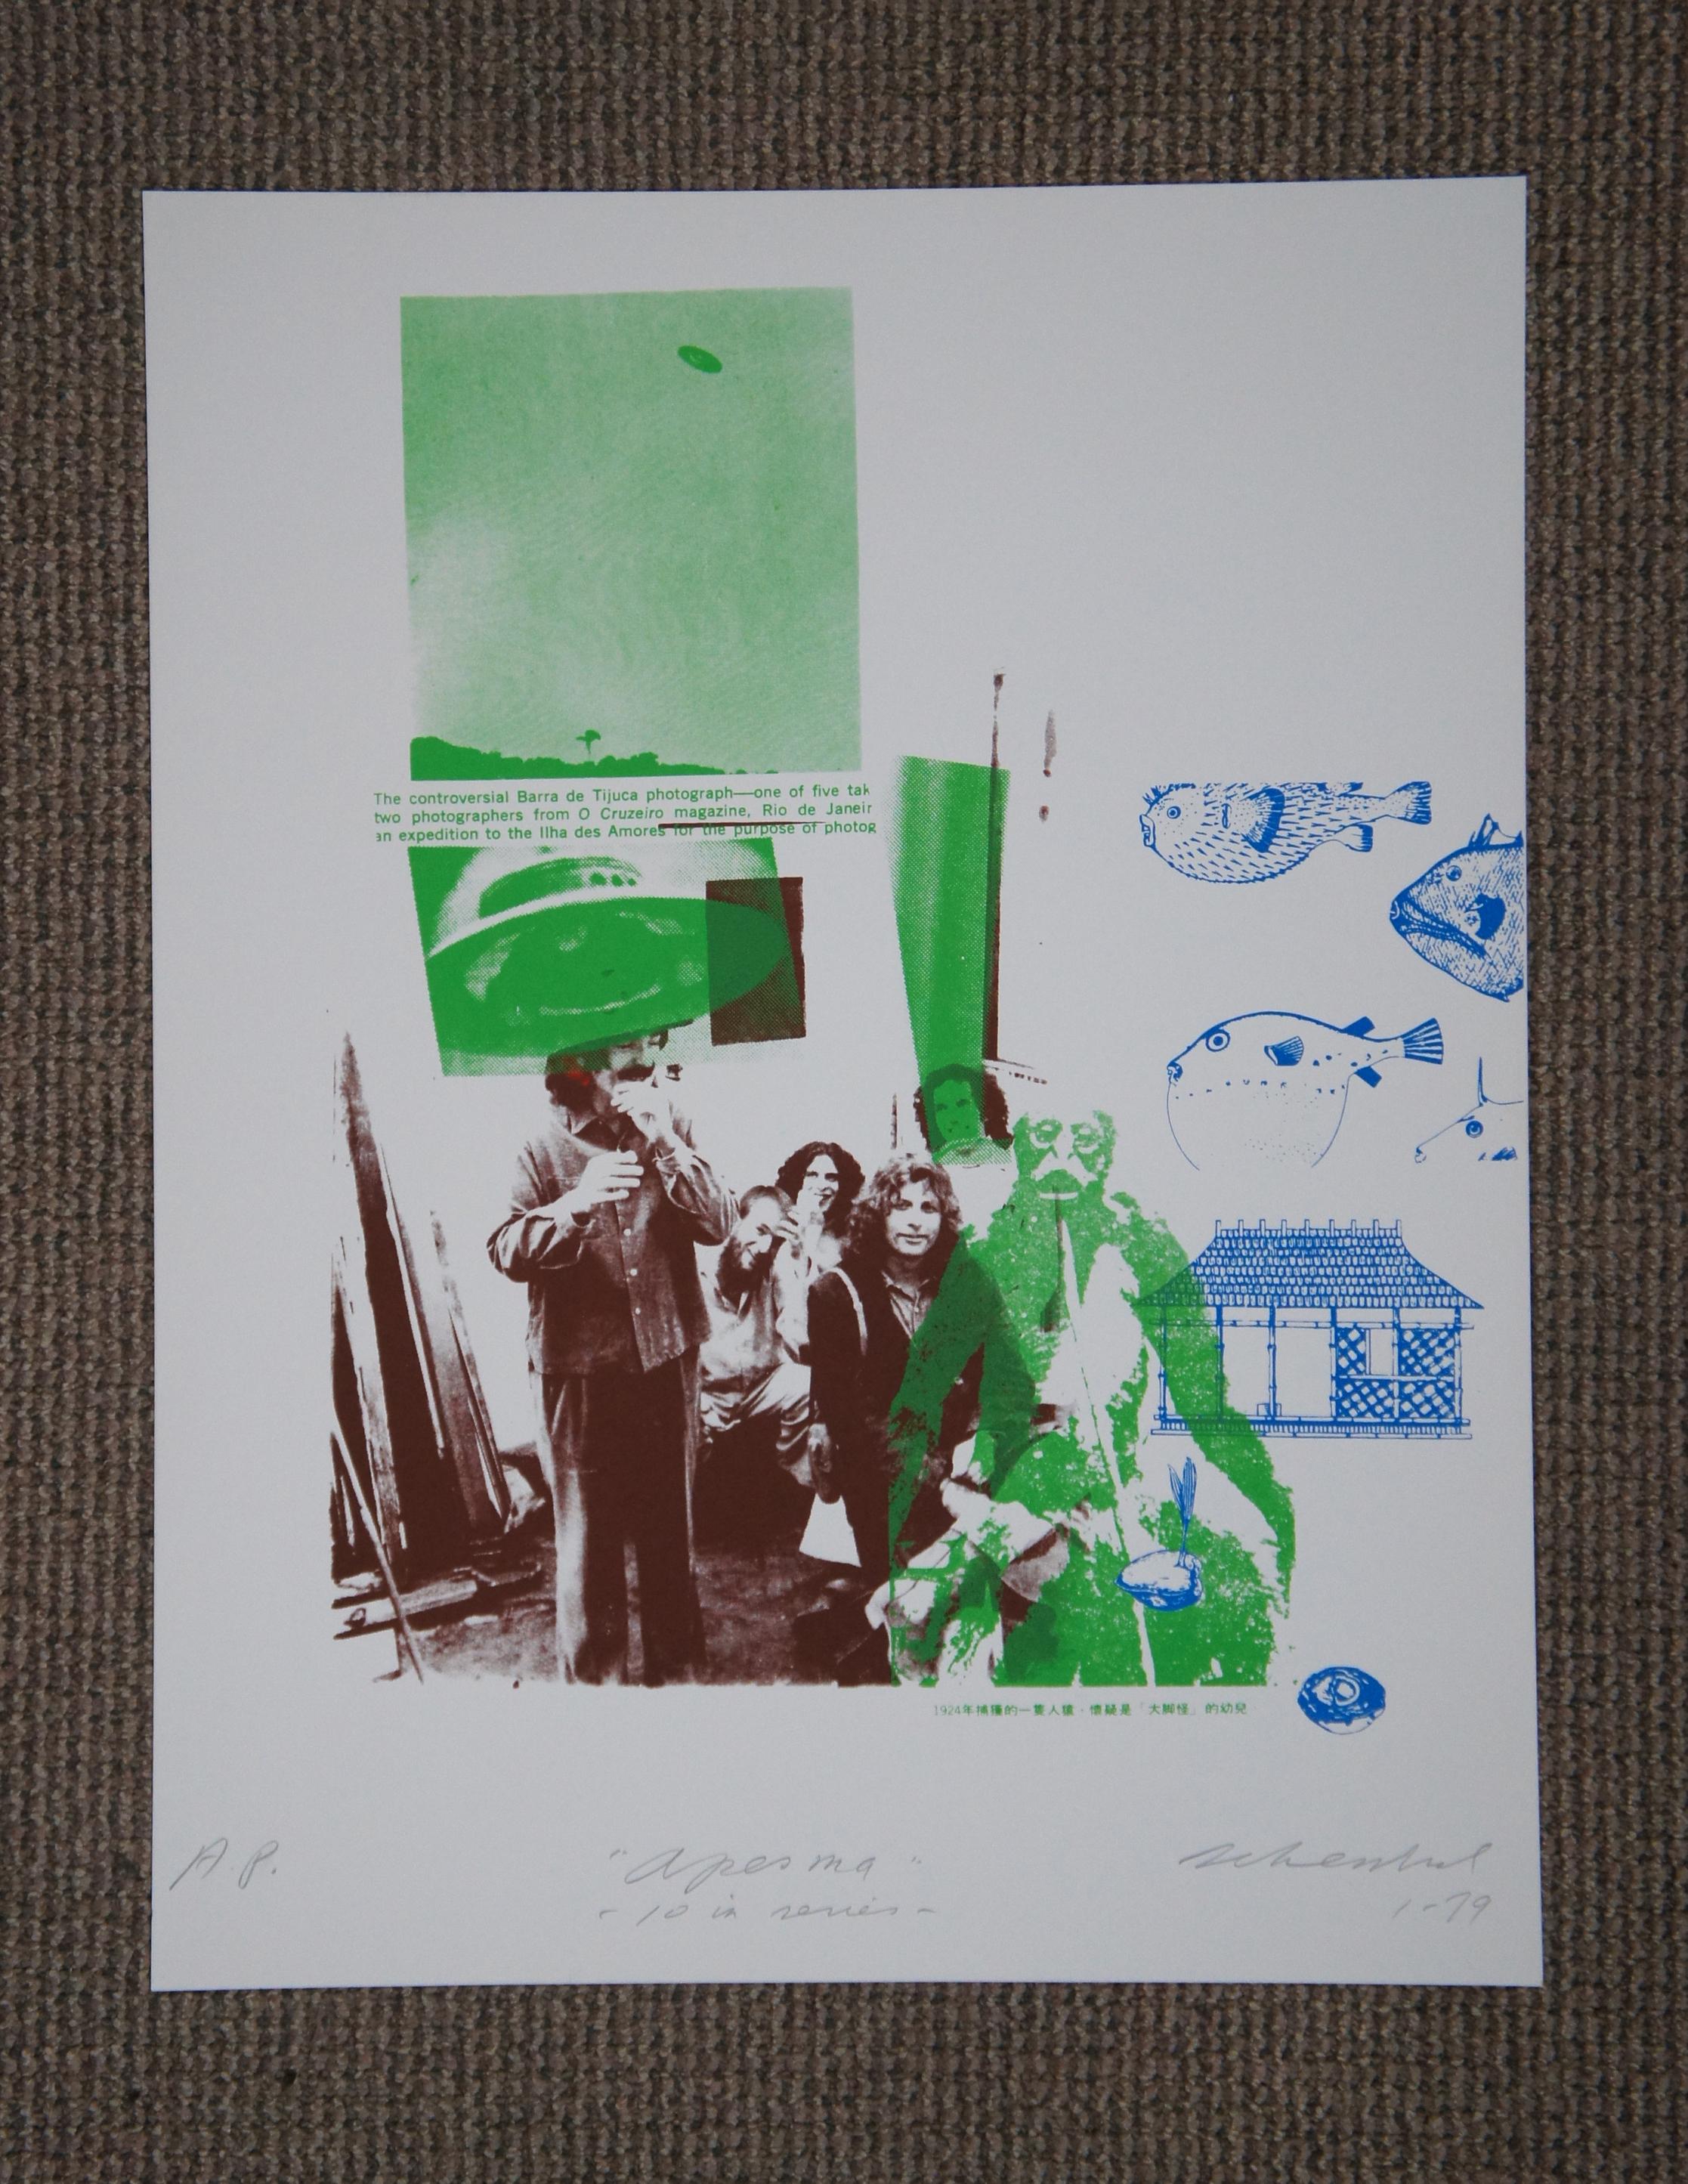 Set of 7 Cal Schenkel 1979 Silkscreen Lithographs Captain Beefheart Frank Zappa In Good Condition For Sale In Dayton, OH